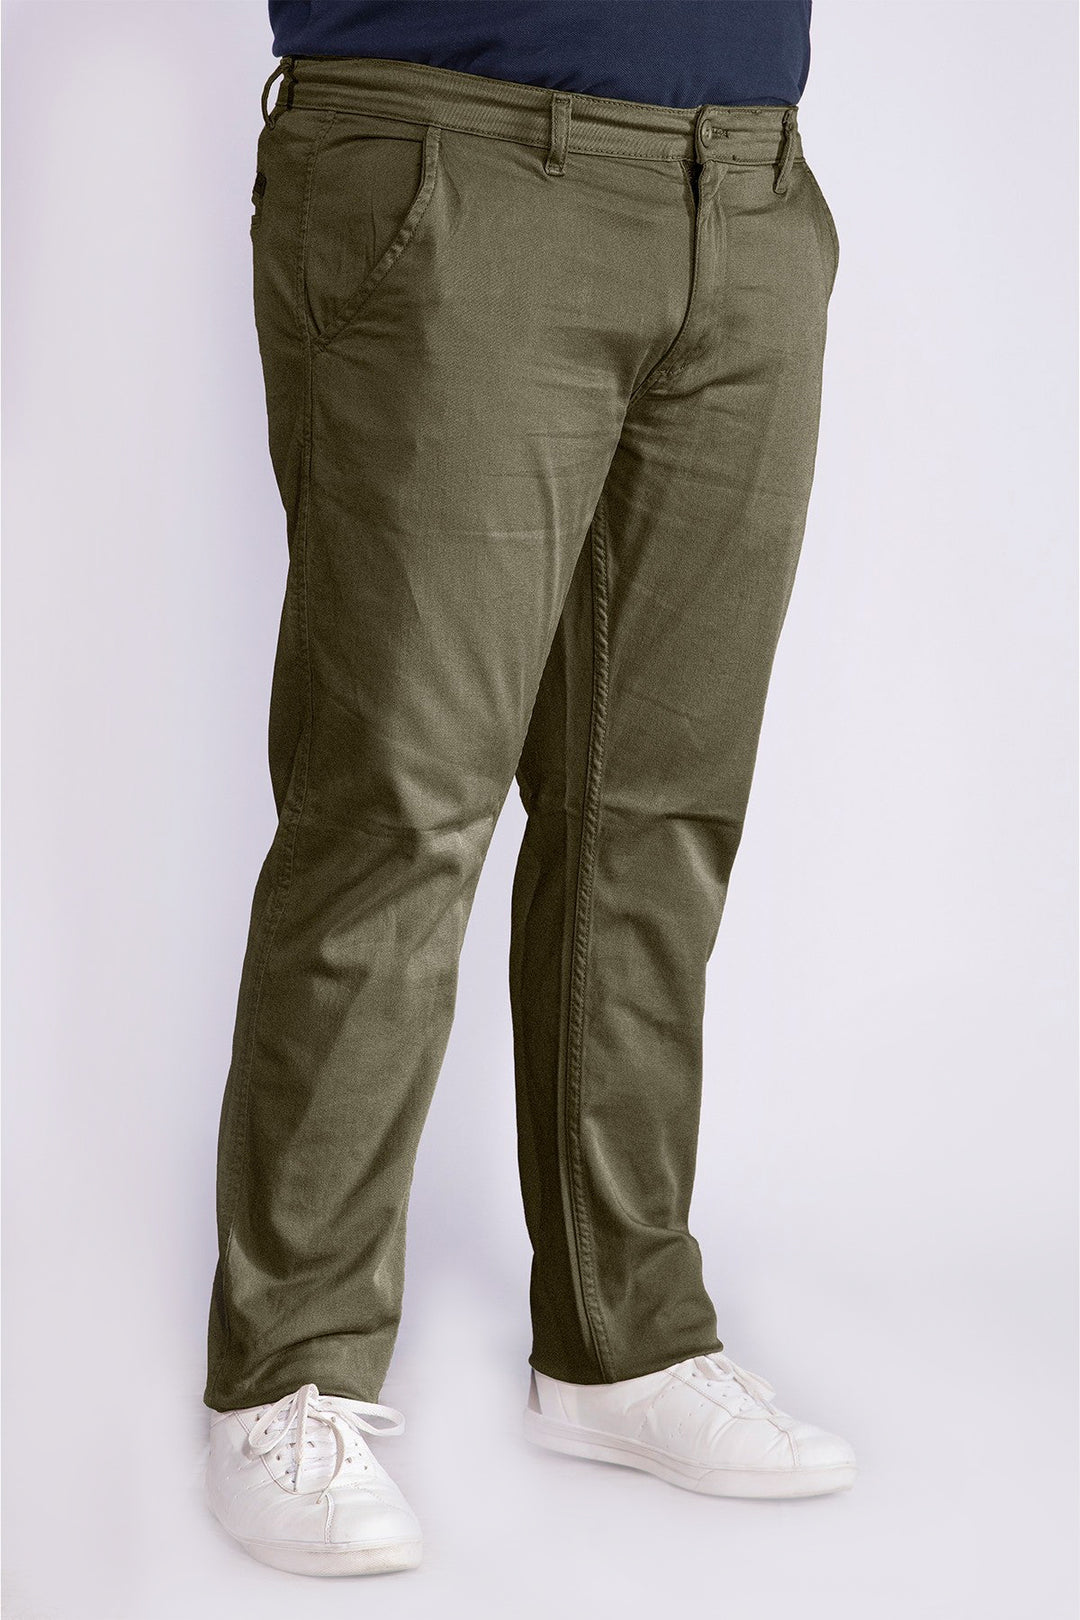 Standard Fit Olive Chinos (Plus Size) - W21 - MC0003P